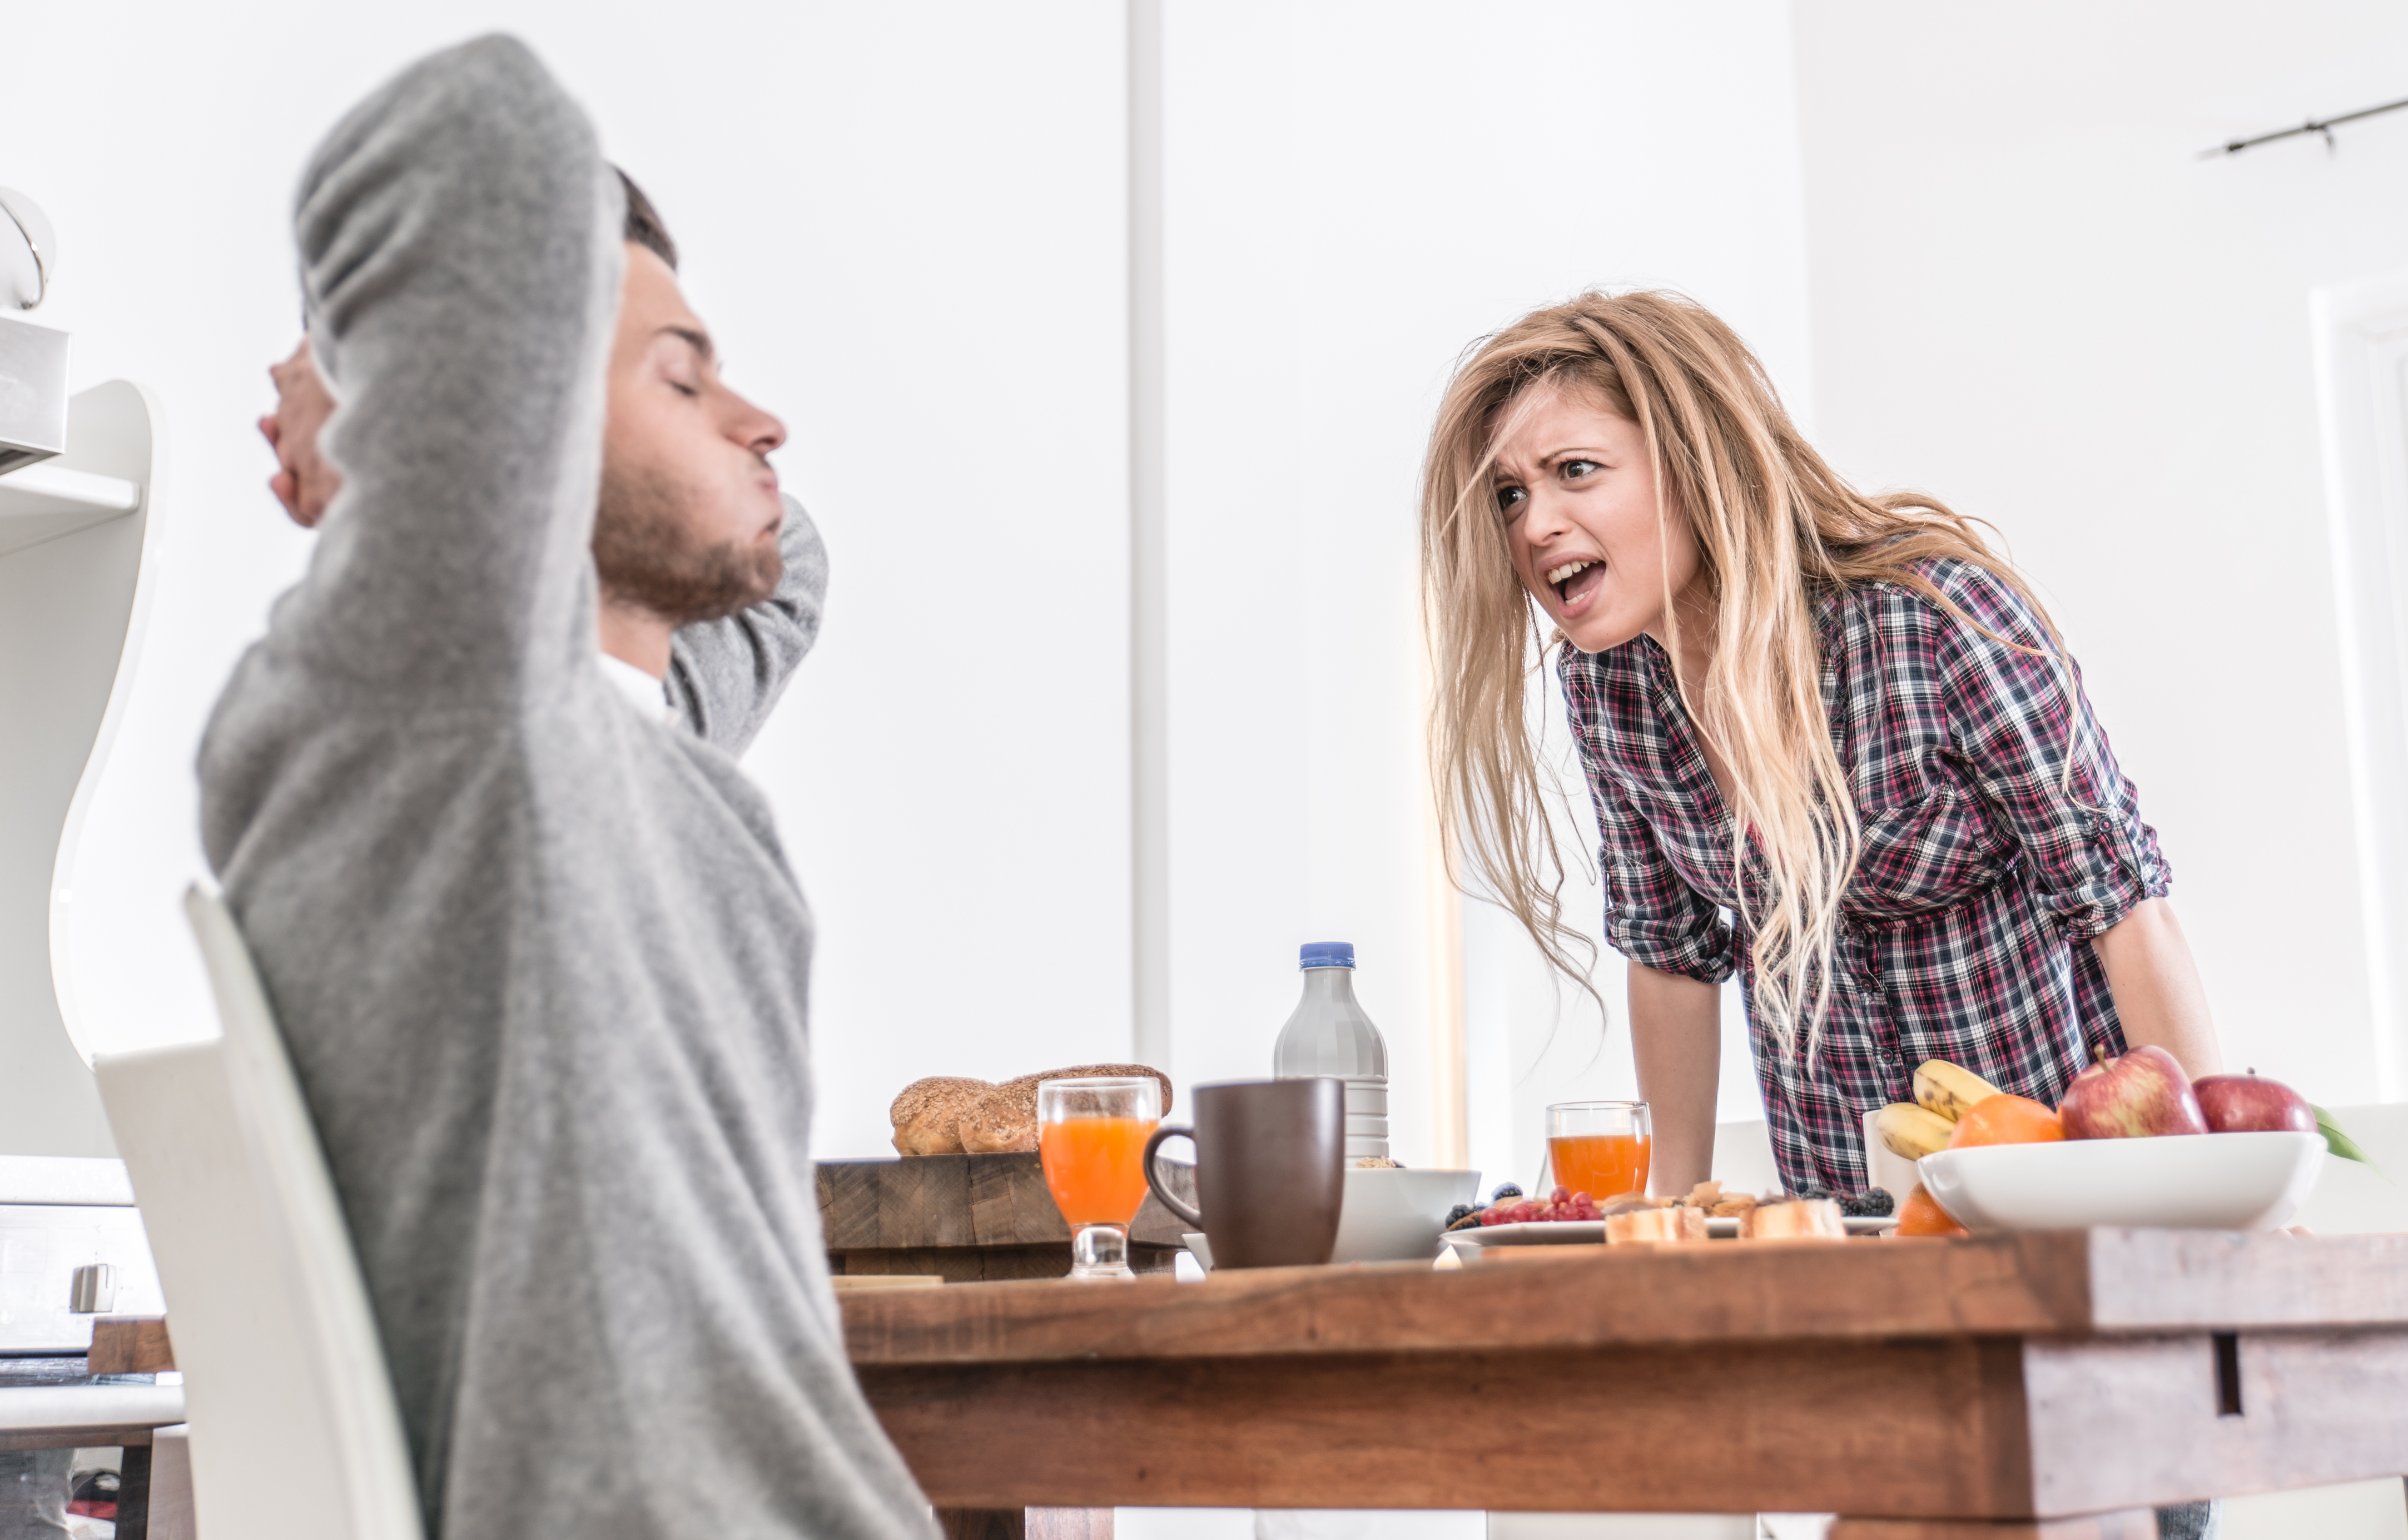 Couple arguing in a kitchen | Source: Shutterstock